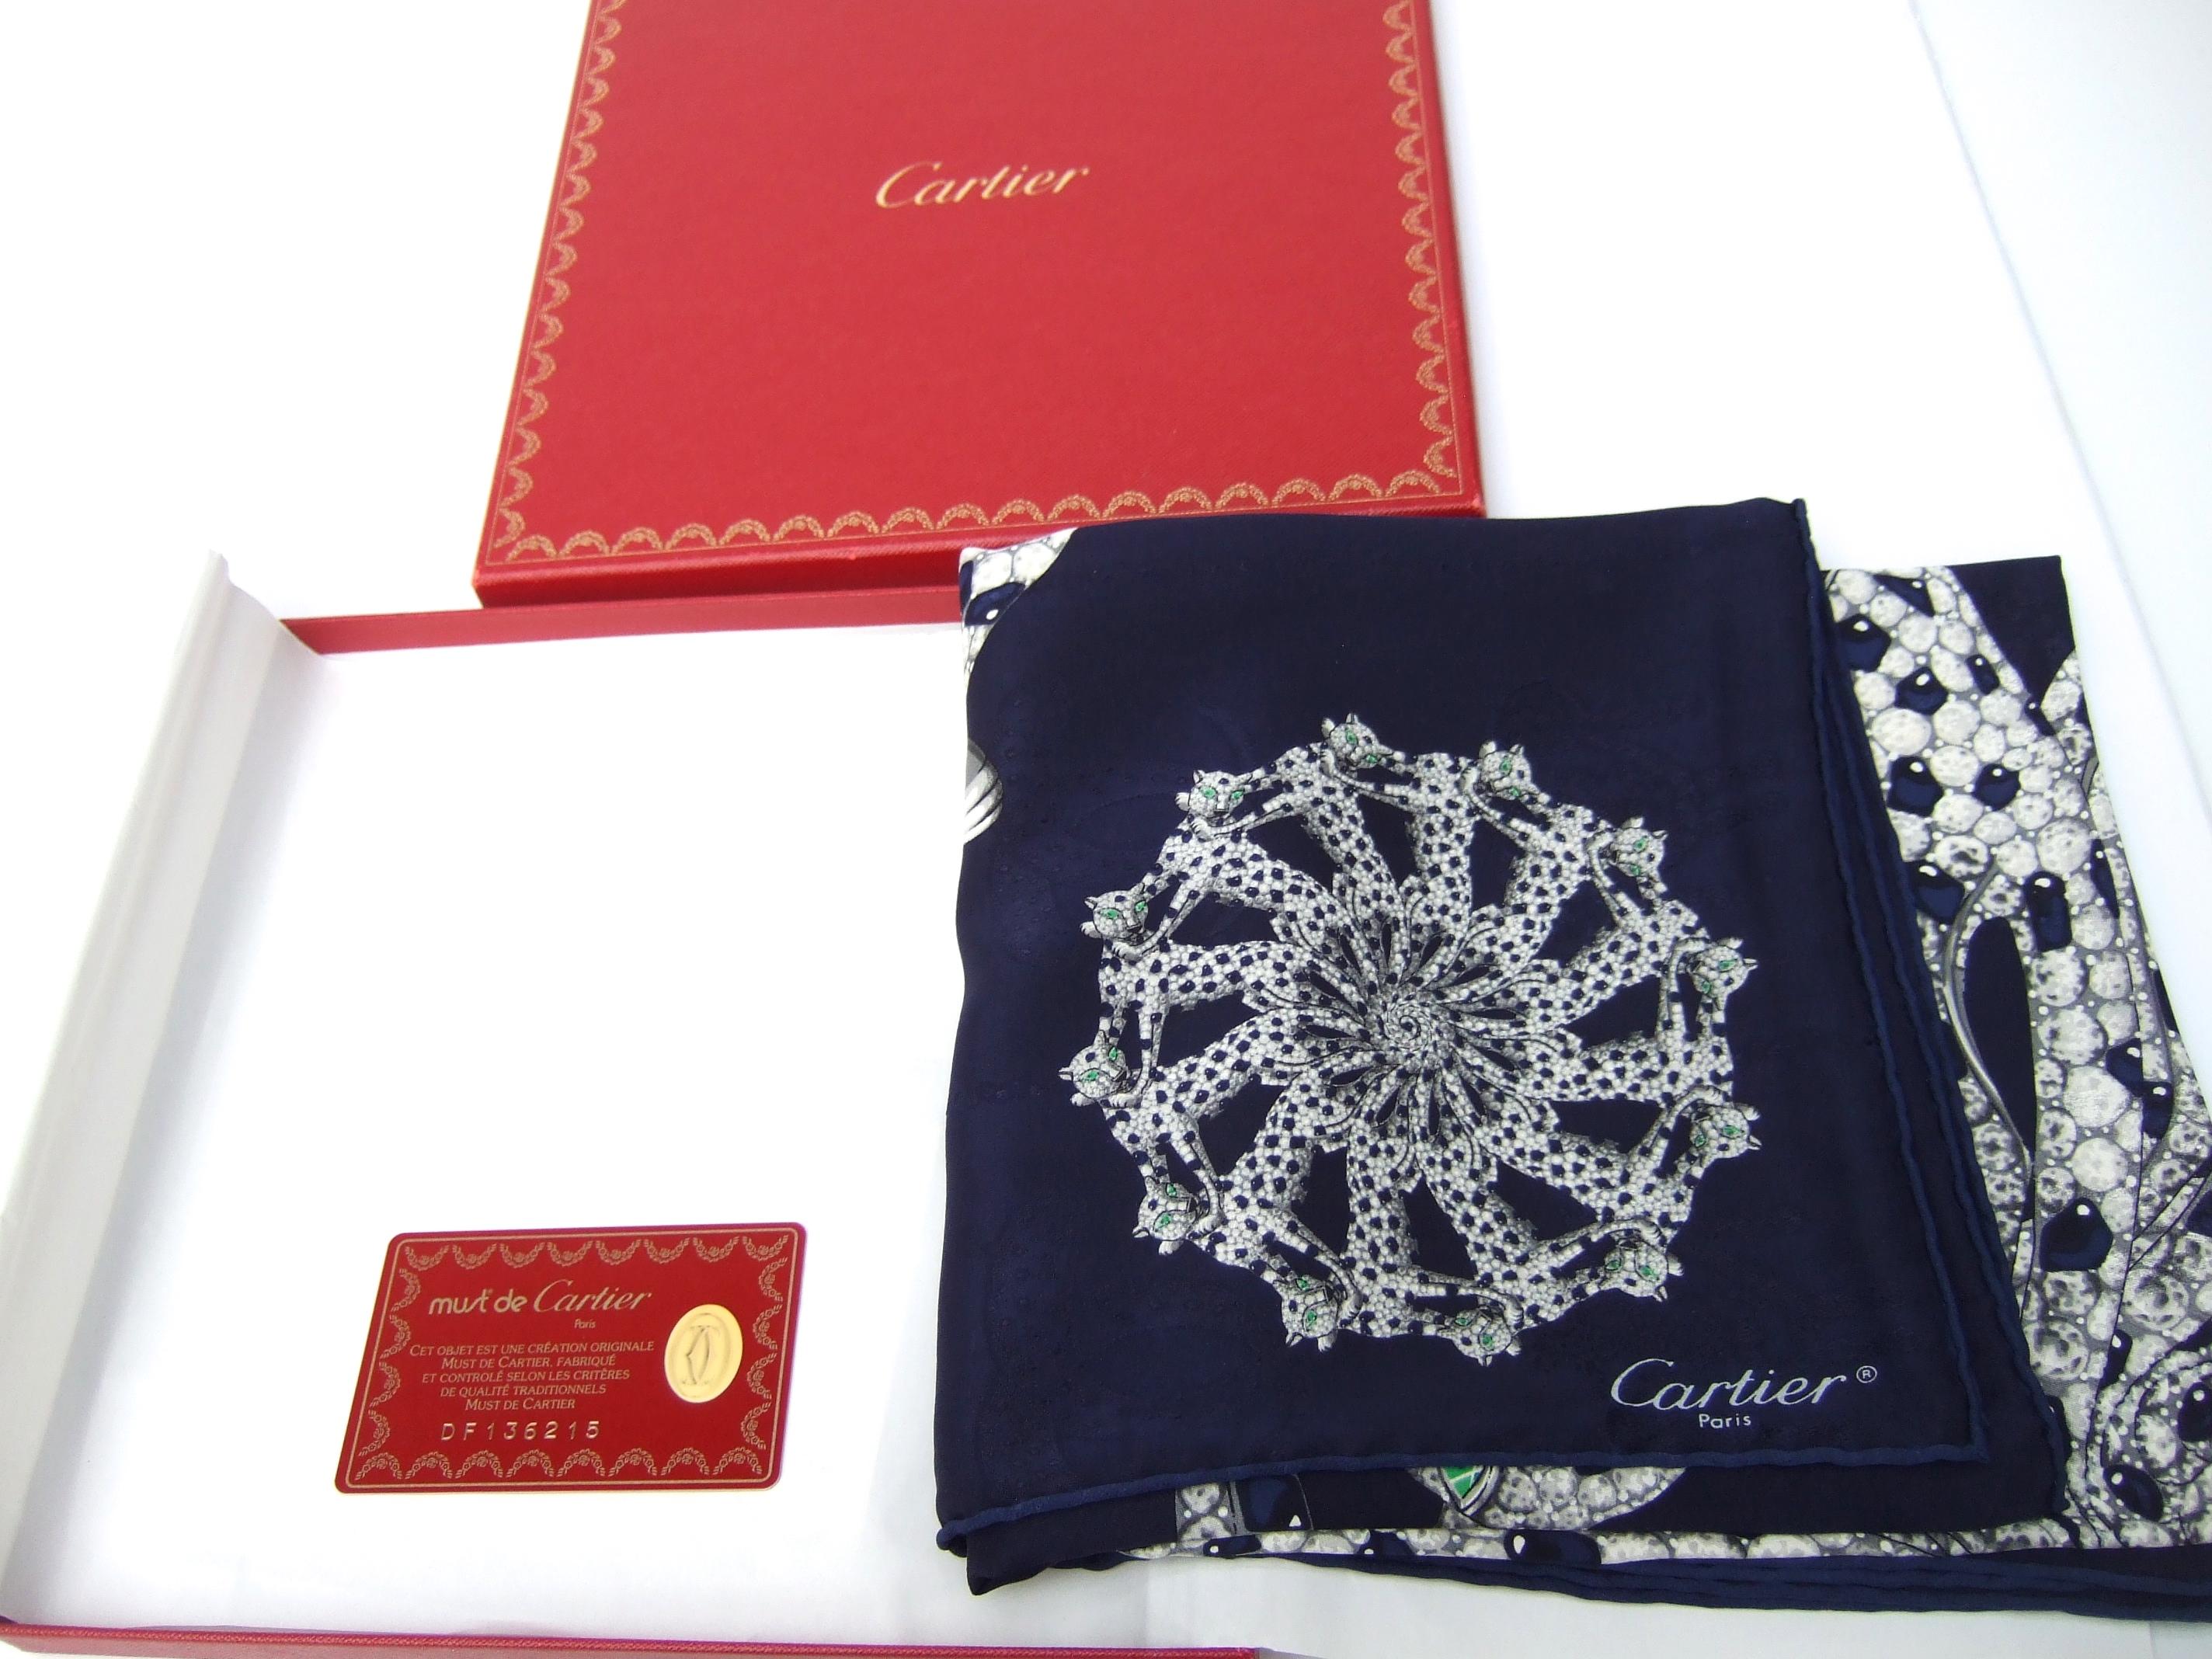 Cartier Paris Silk Panther Hand Rolled Scarf in Cartier Box c 1990s 32 x 34  For Sale 4